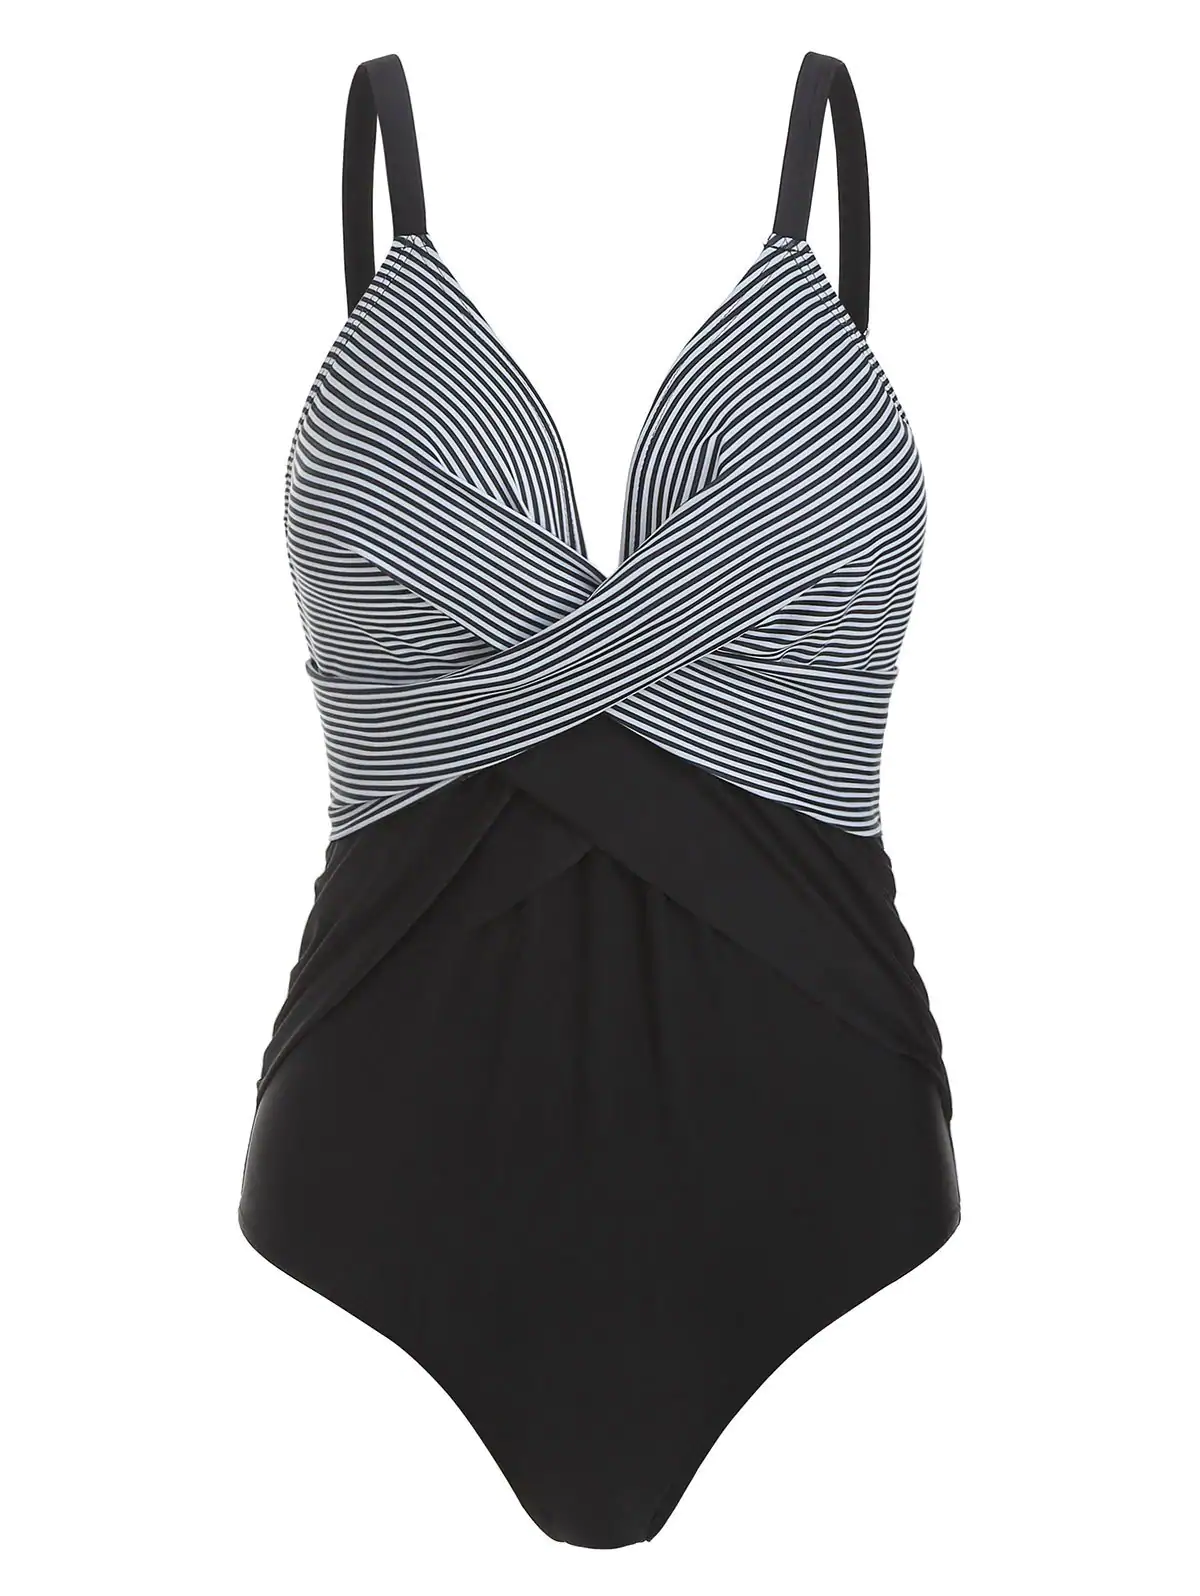 Twisted Striped One-piece Swimsuit